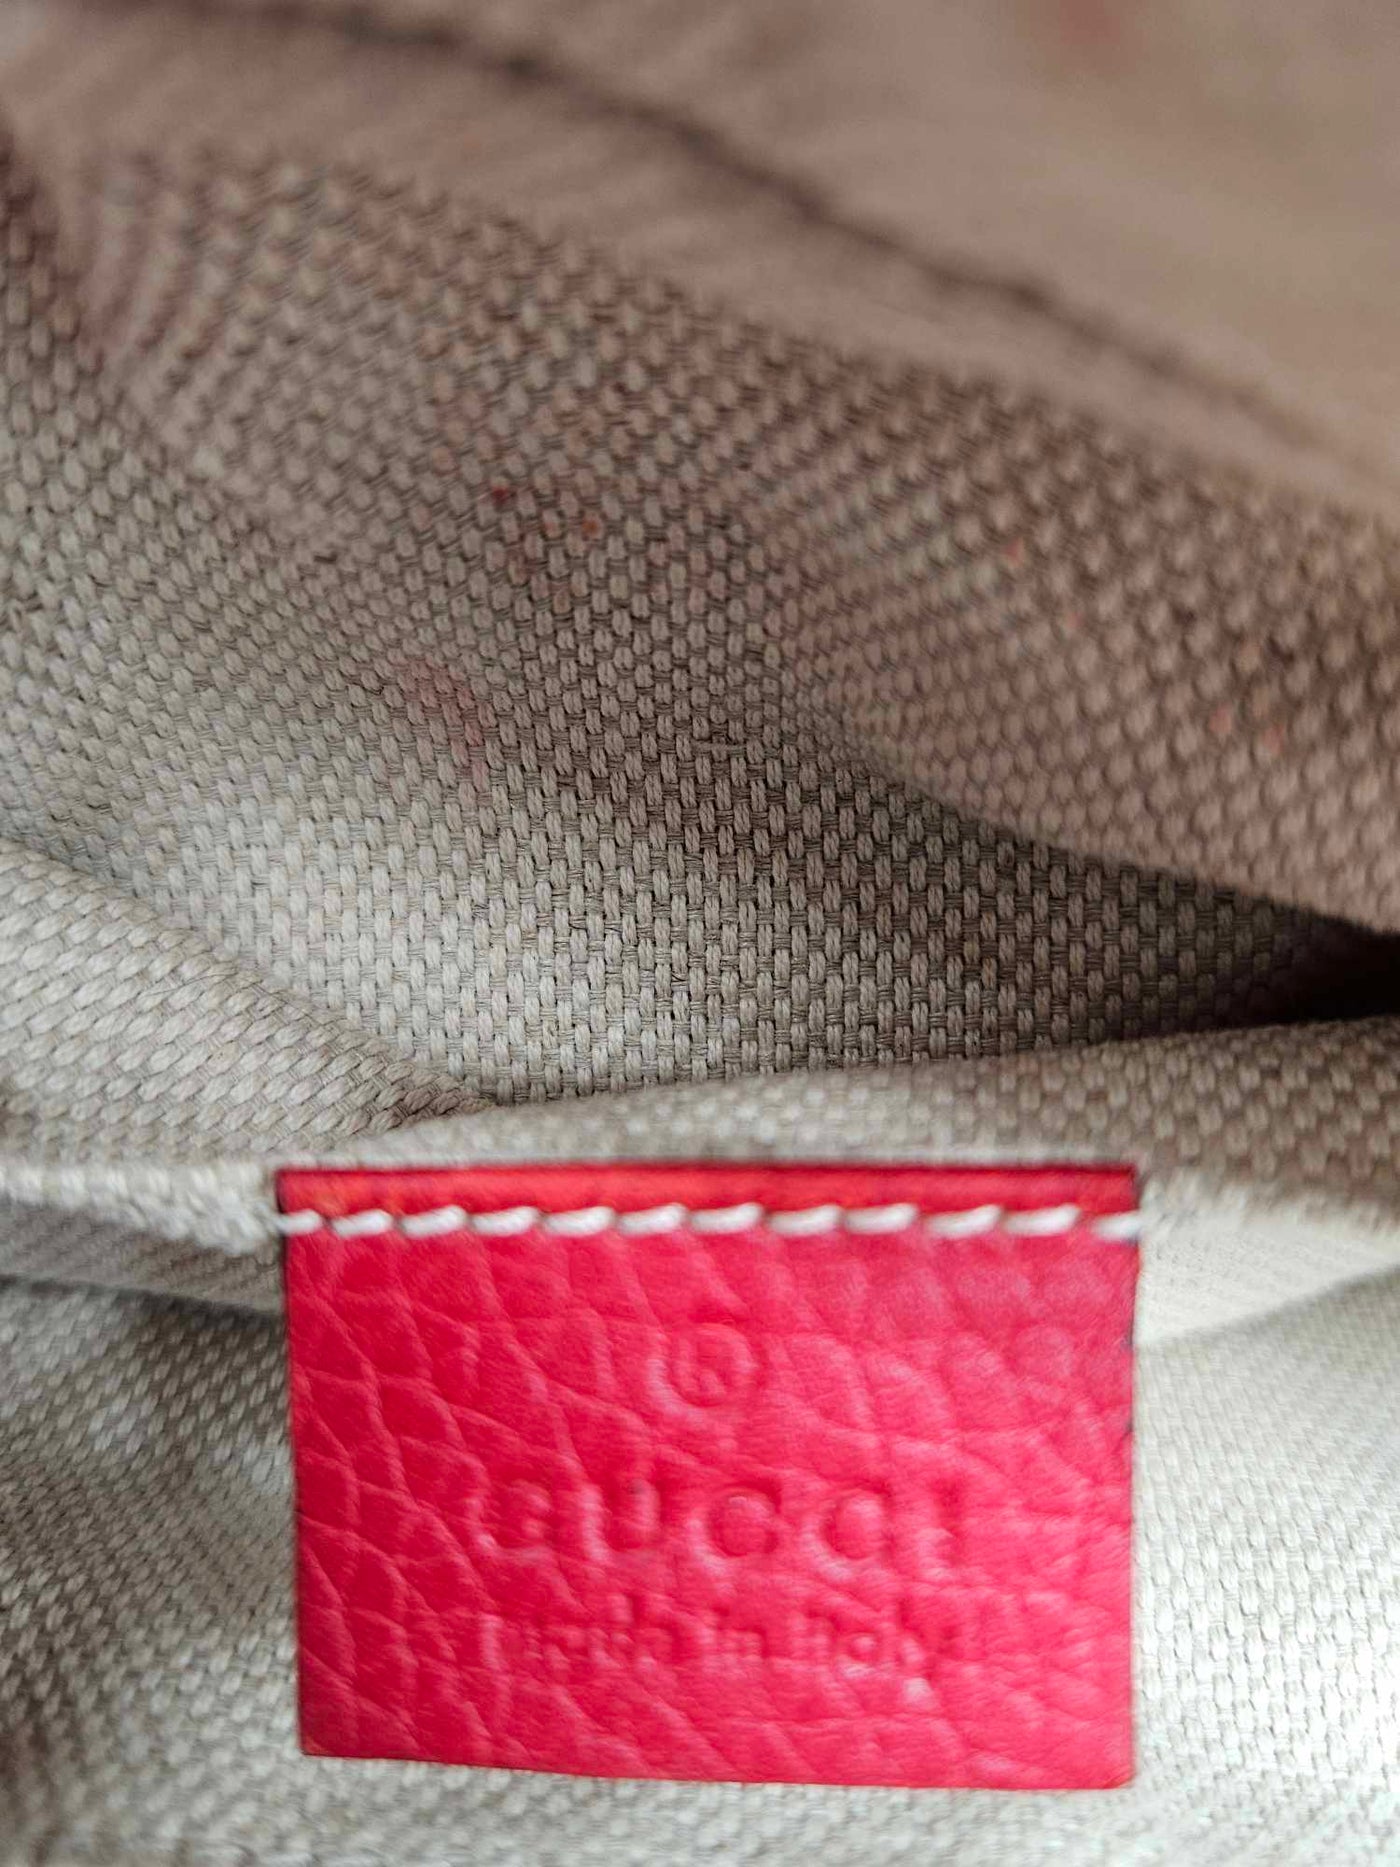 Gucci GG Red Leather Crossbody Bag